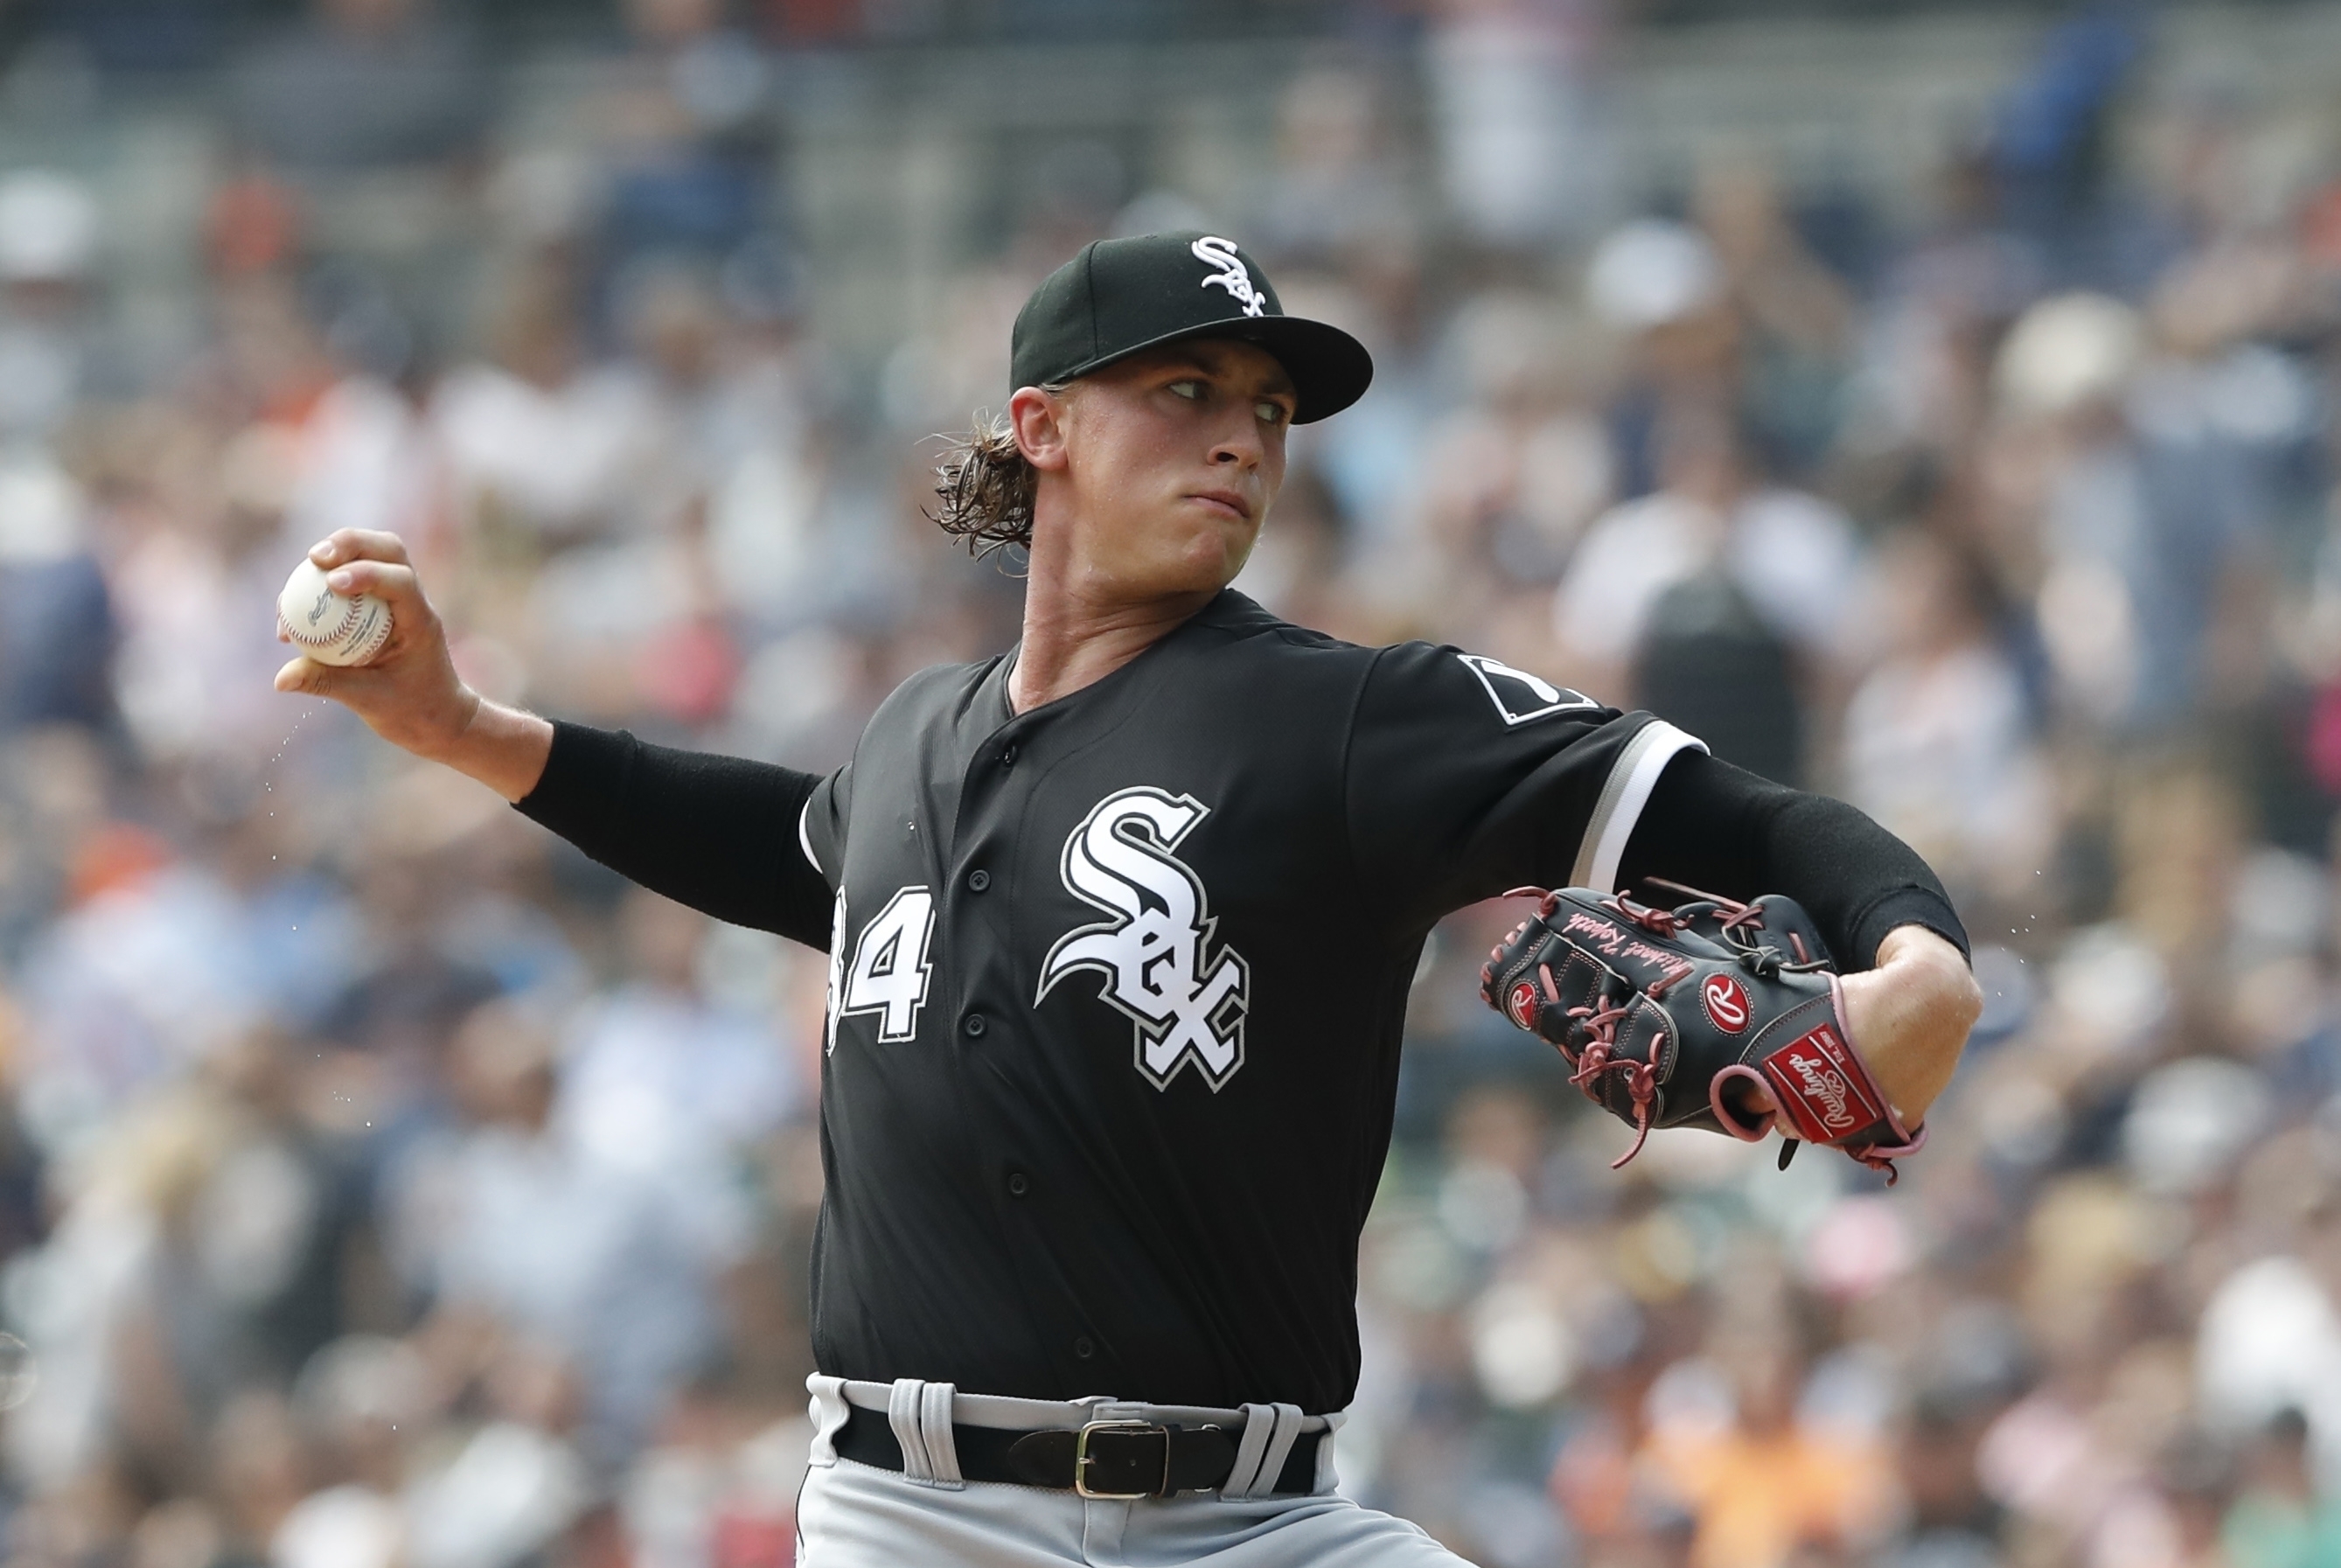 Fixing Michael Kopech: White Sox turn to new front-office hire